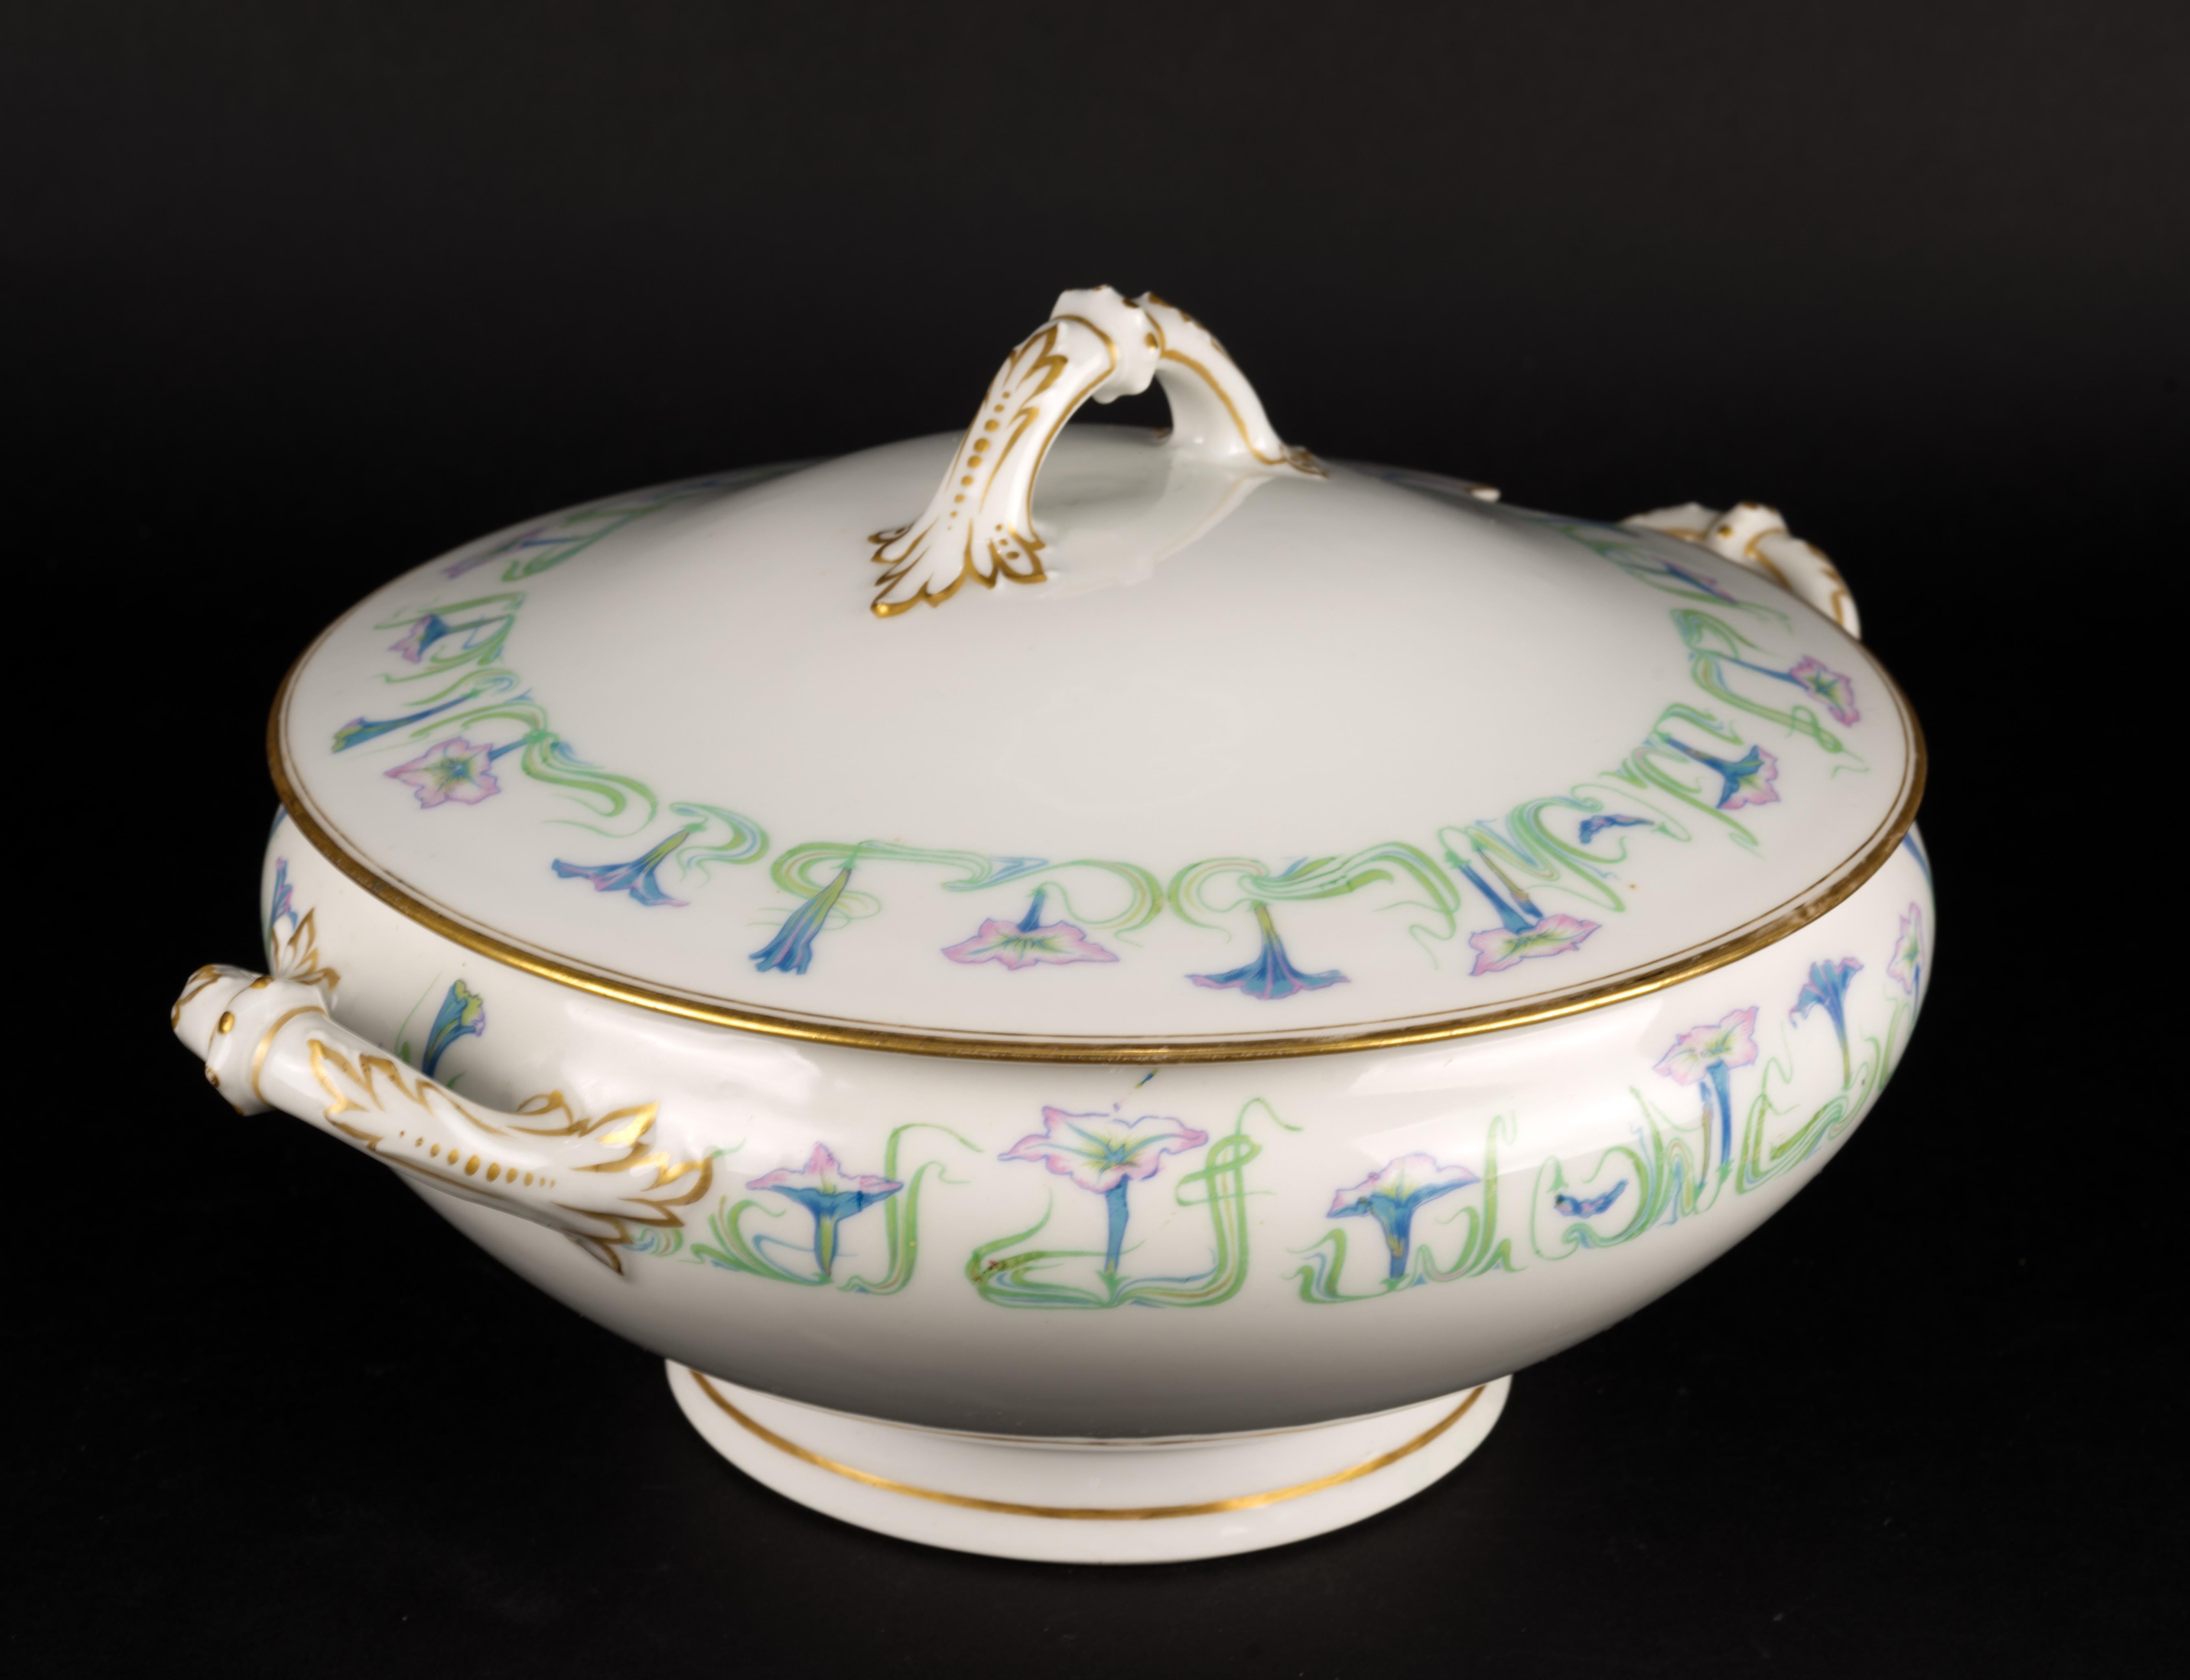 Haviland Limoges Soup Tureen Schleiger 491, Art Deco Porcelain 1894-1931 In Good Condition For Sale In Clifton Springs, NY